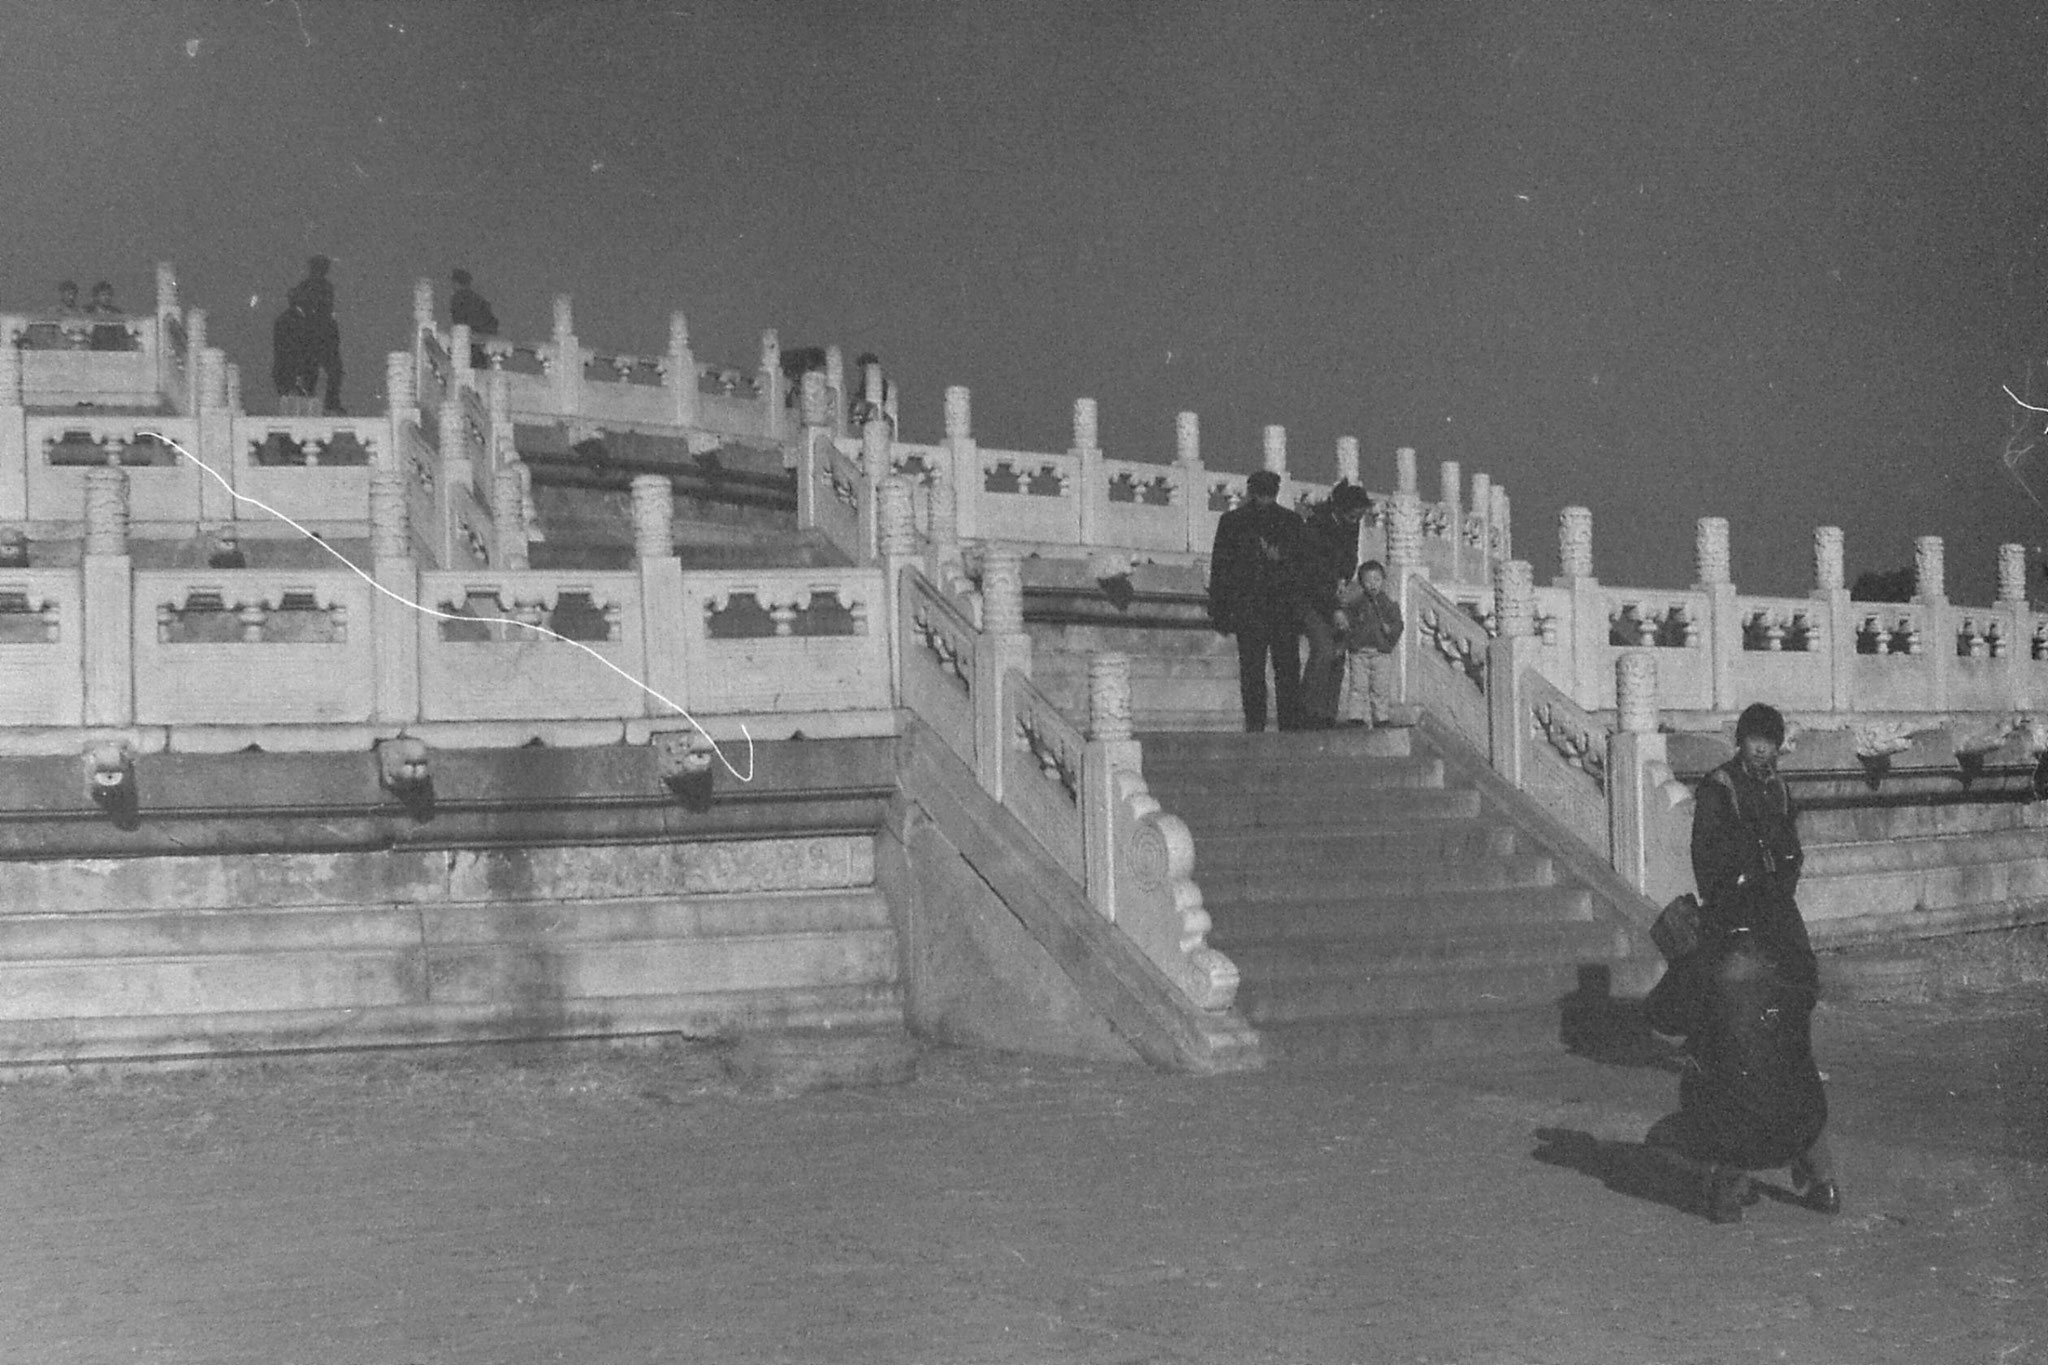 2/12/1988: 29: nr and in Tiantan park